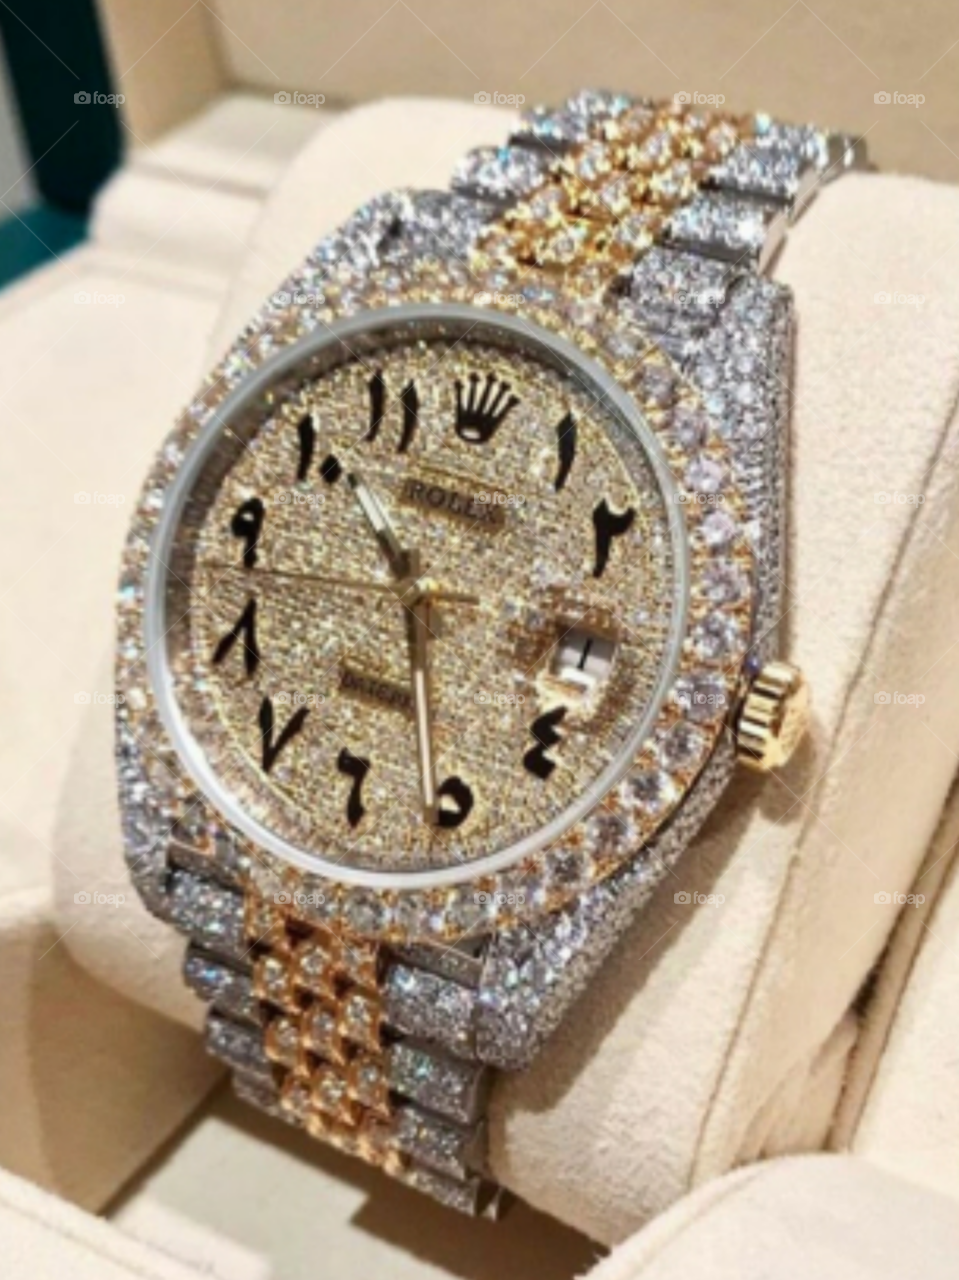 Nothing but a Rolex life. Make your money.